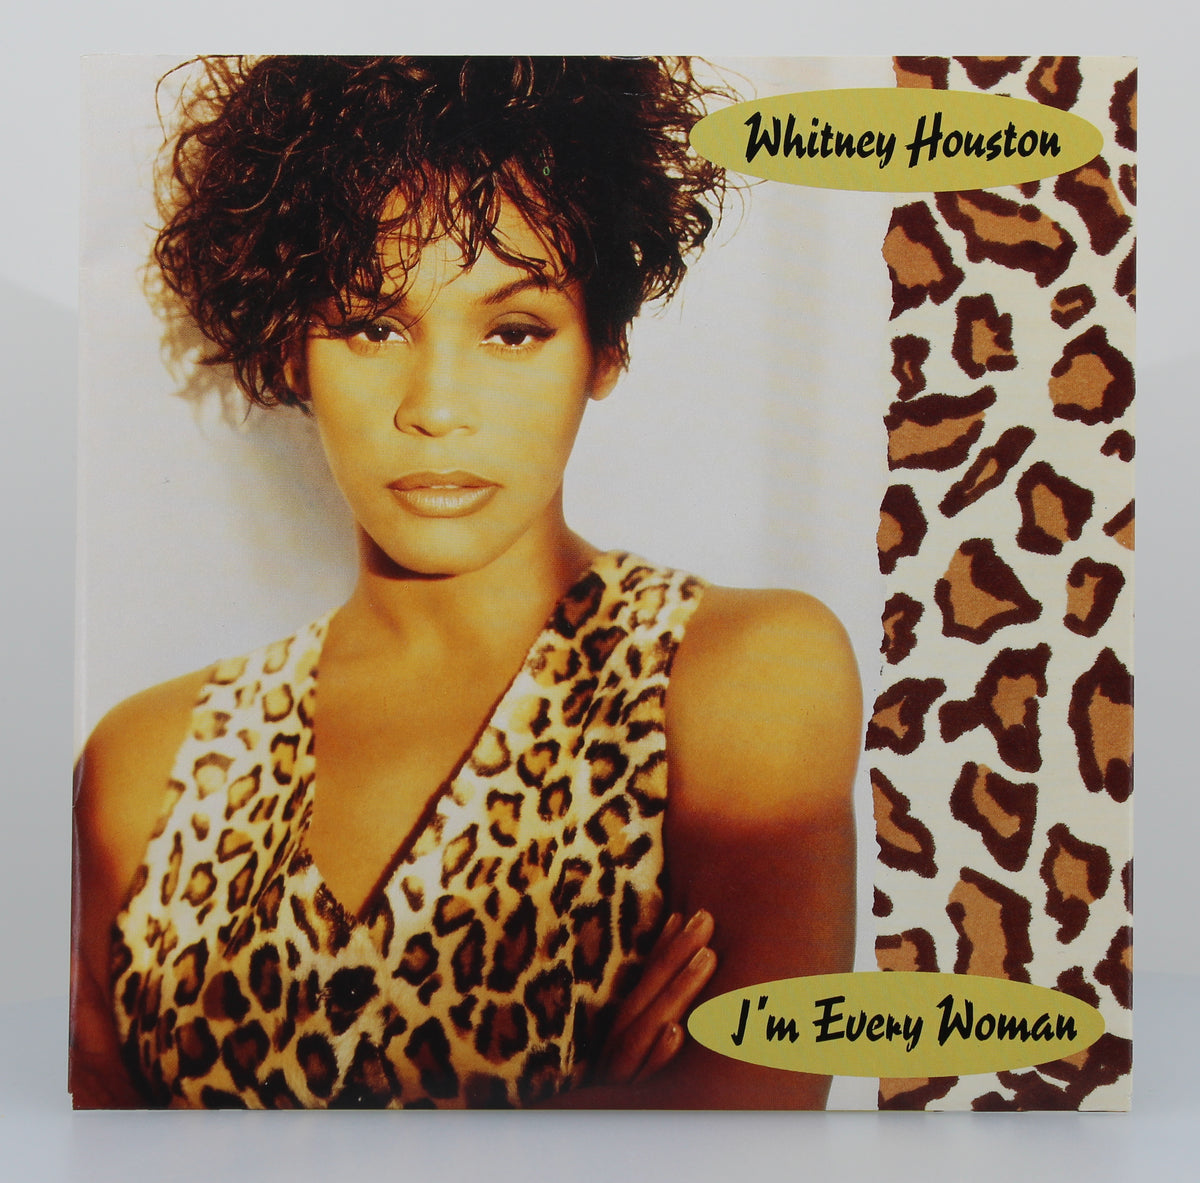 Whitney Houston – I&#39;m Every Woman, Vinyl, 7&quot;, 45 RPM, Single, Stereo, Holland 1993